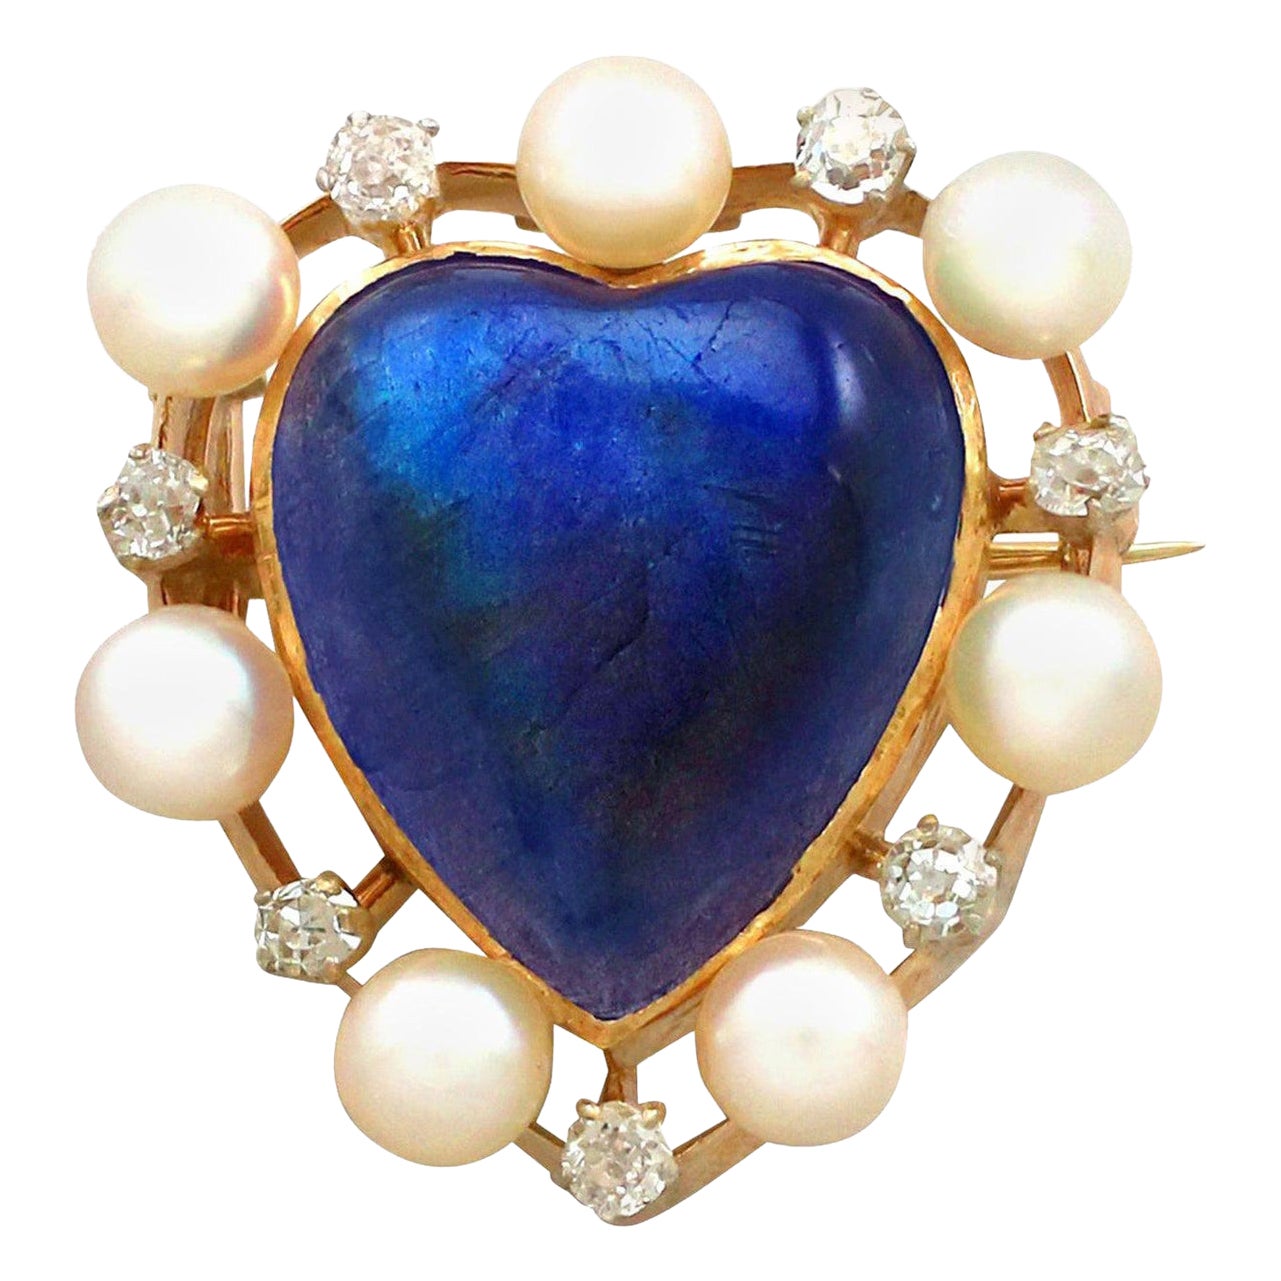 Antique 3.98Ct Cabochon Cut Labradorite and Seed Pearl Diamond and Gold Brooch For Sale